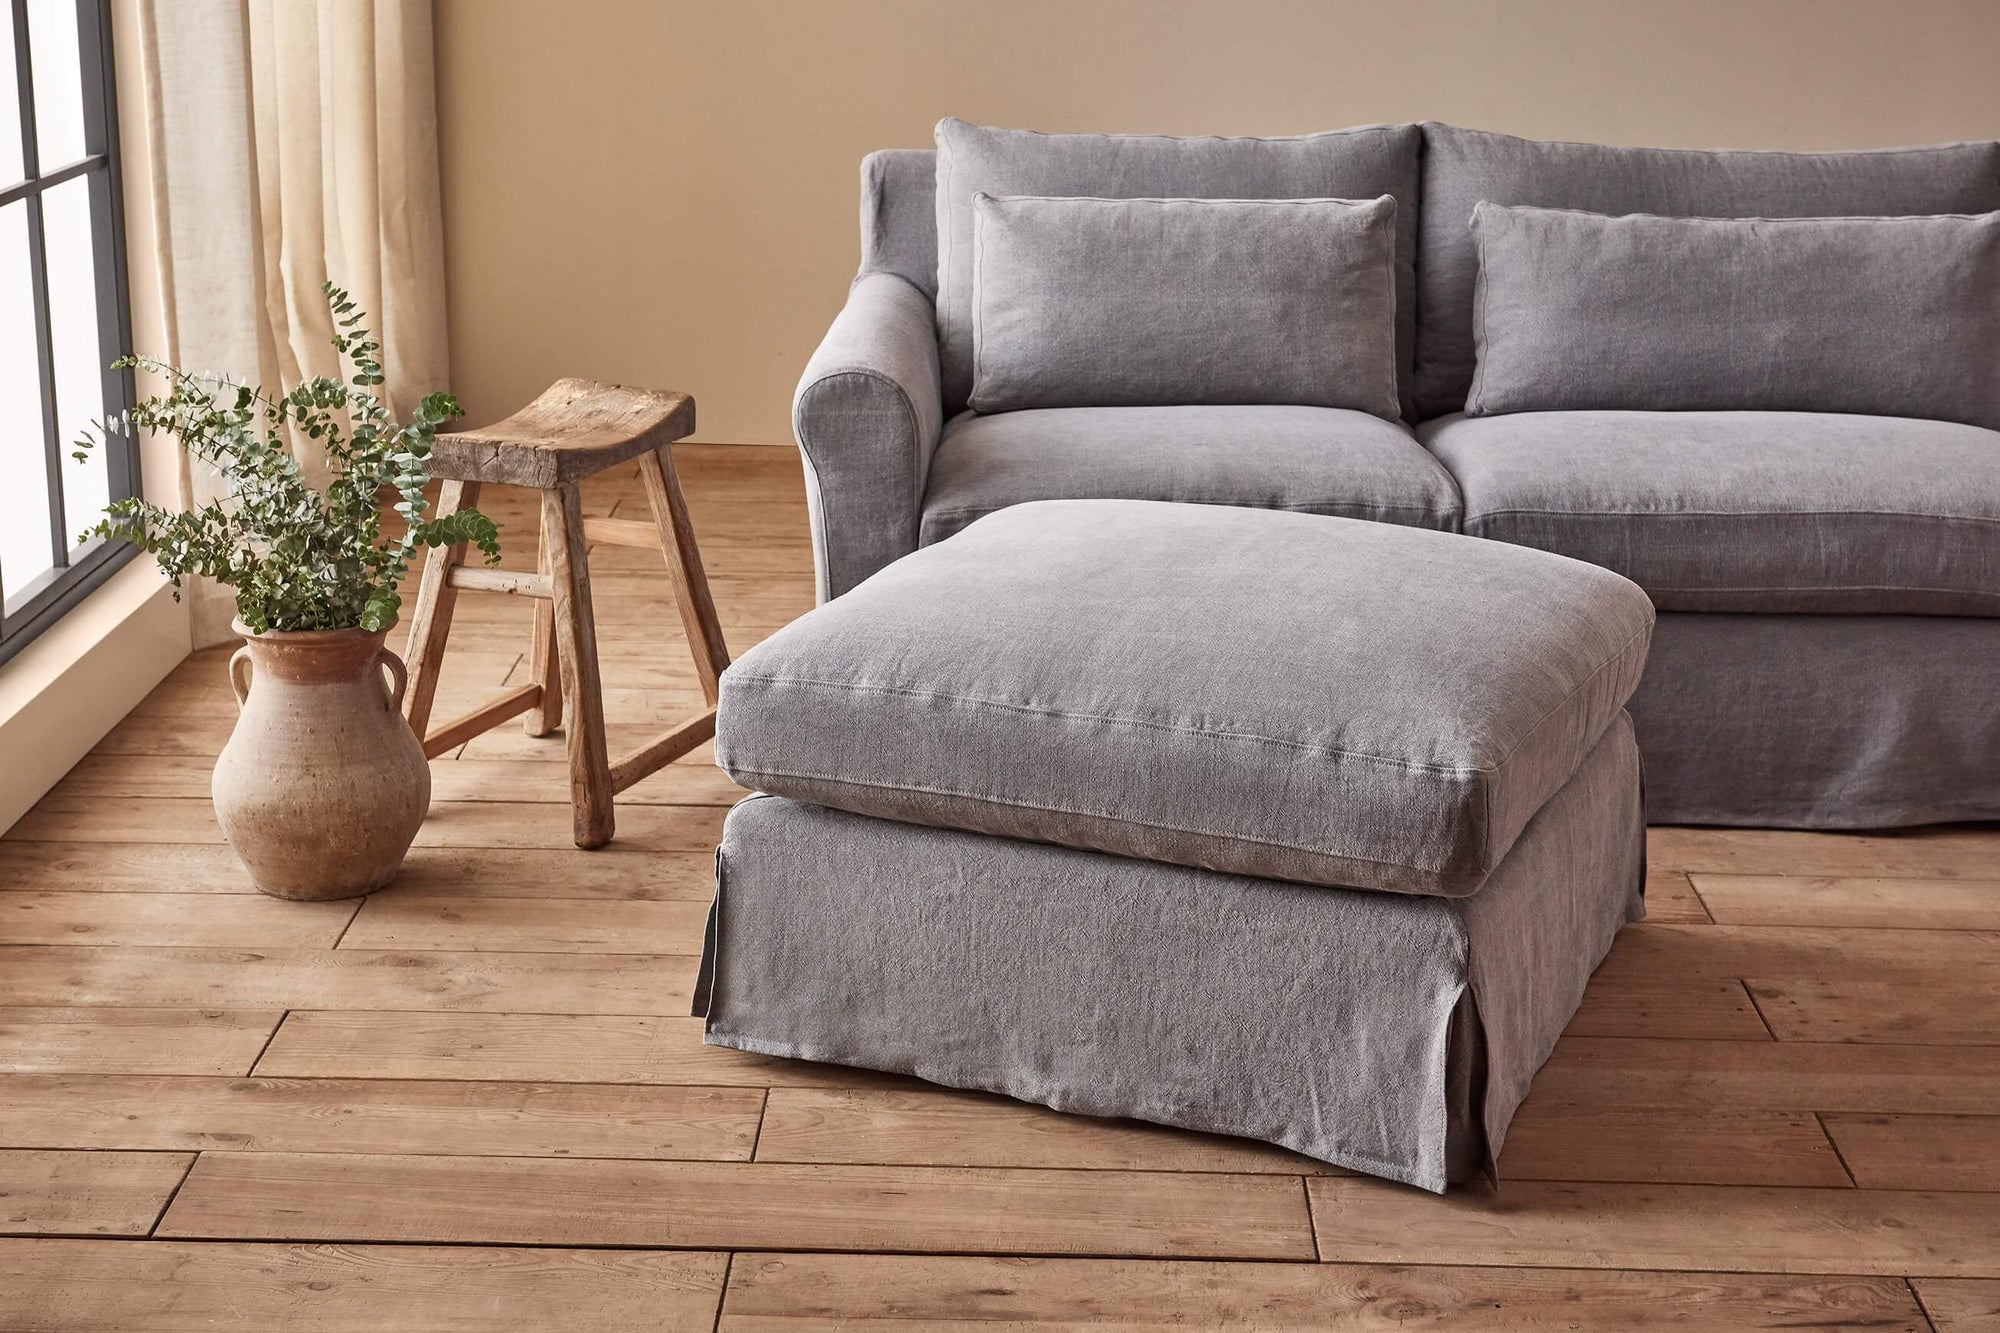 Elias Sectional Ottoman in Ink Cap, a medium cool grey Light Weight Linen, placed in a room with the Elias Sectional Sofa